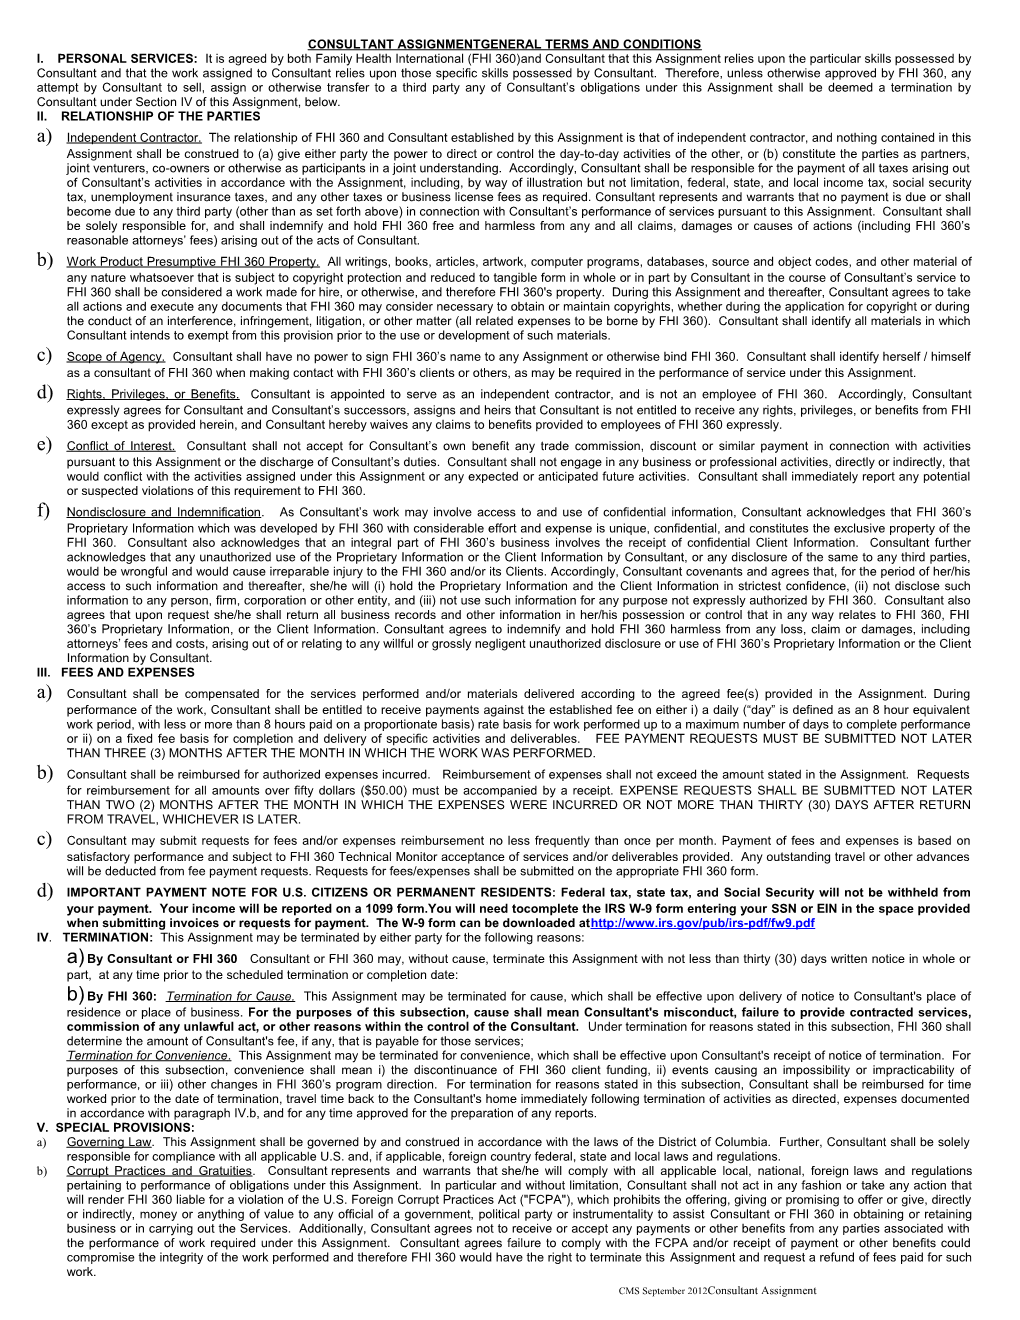 Consultant Assignment Agreement: Sep 5 2012